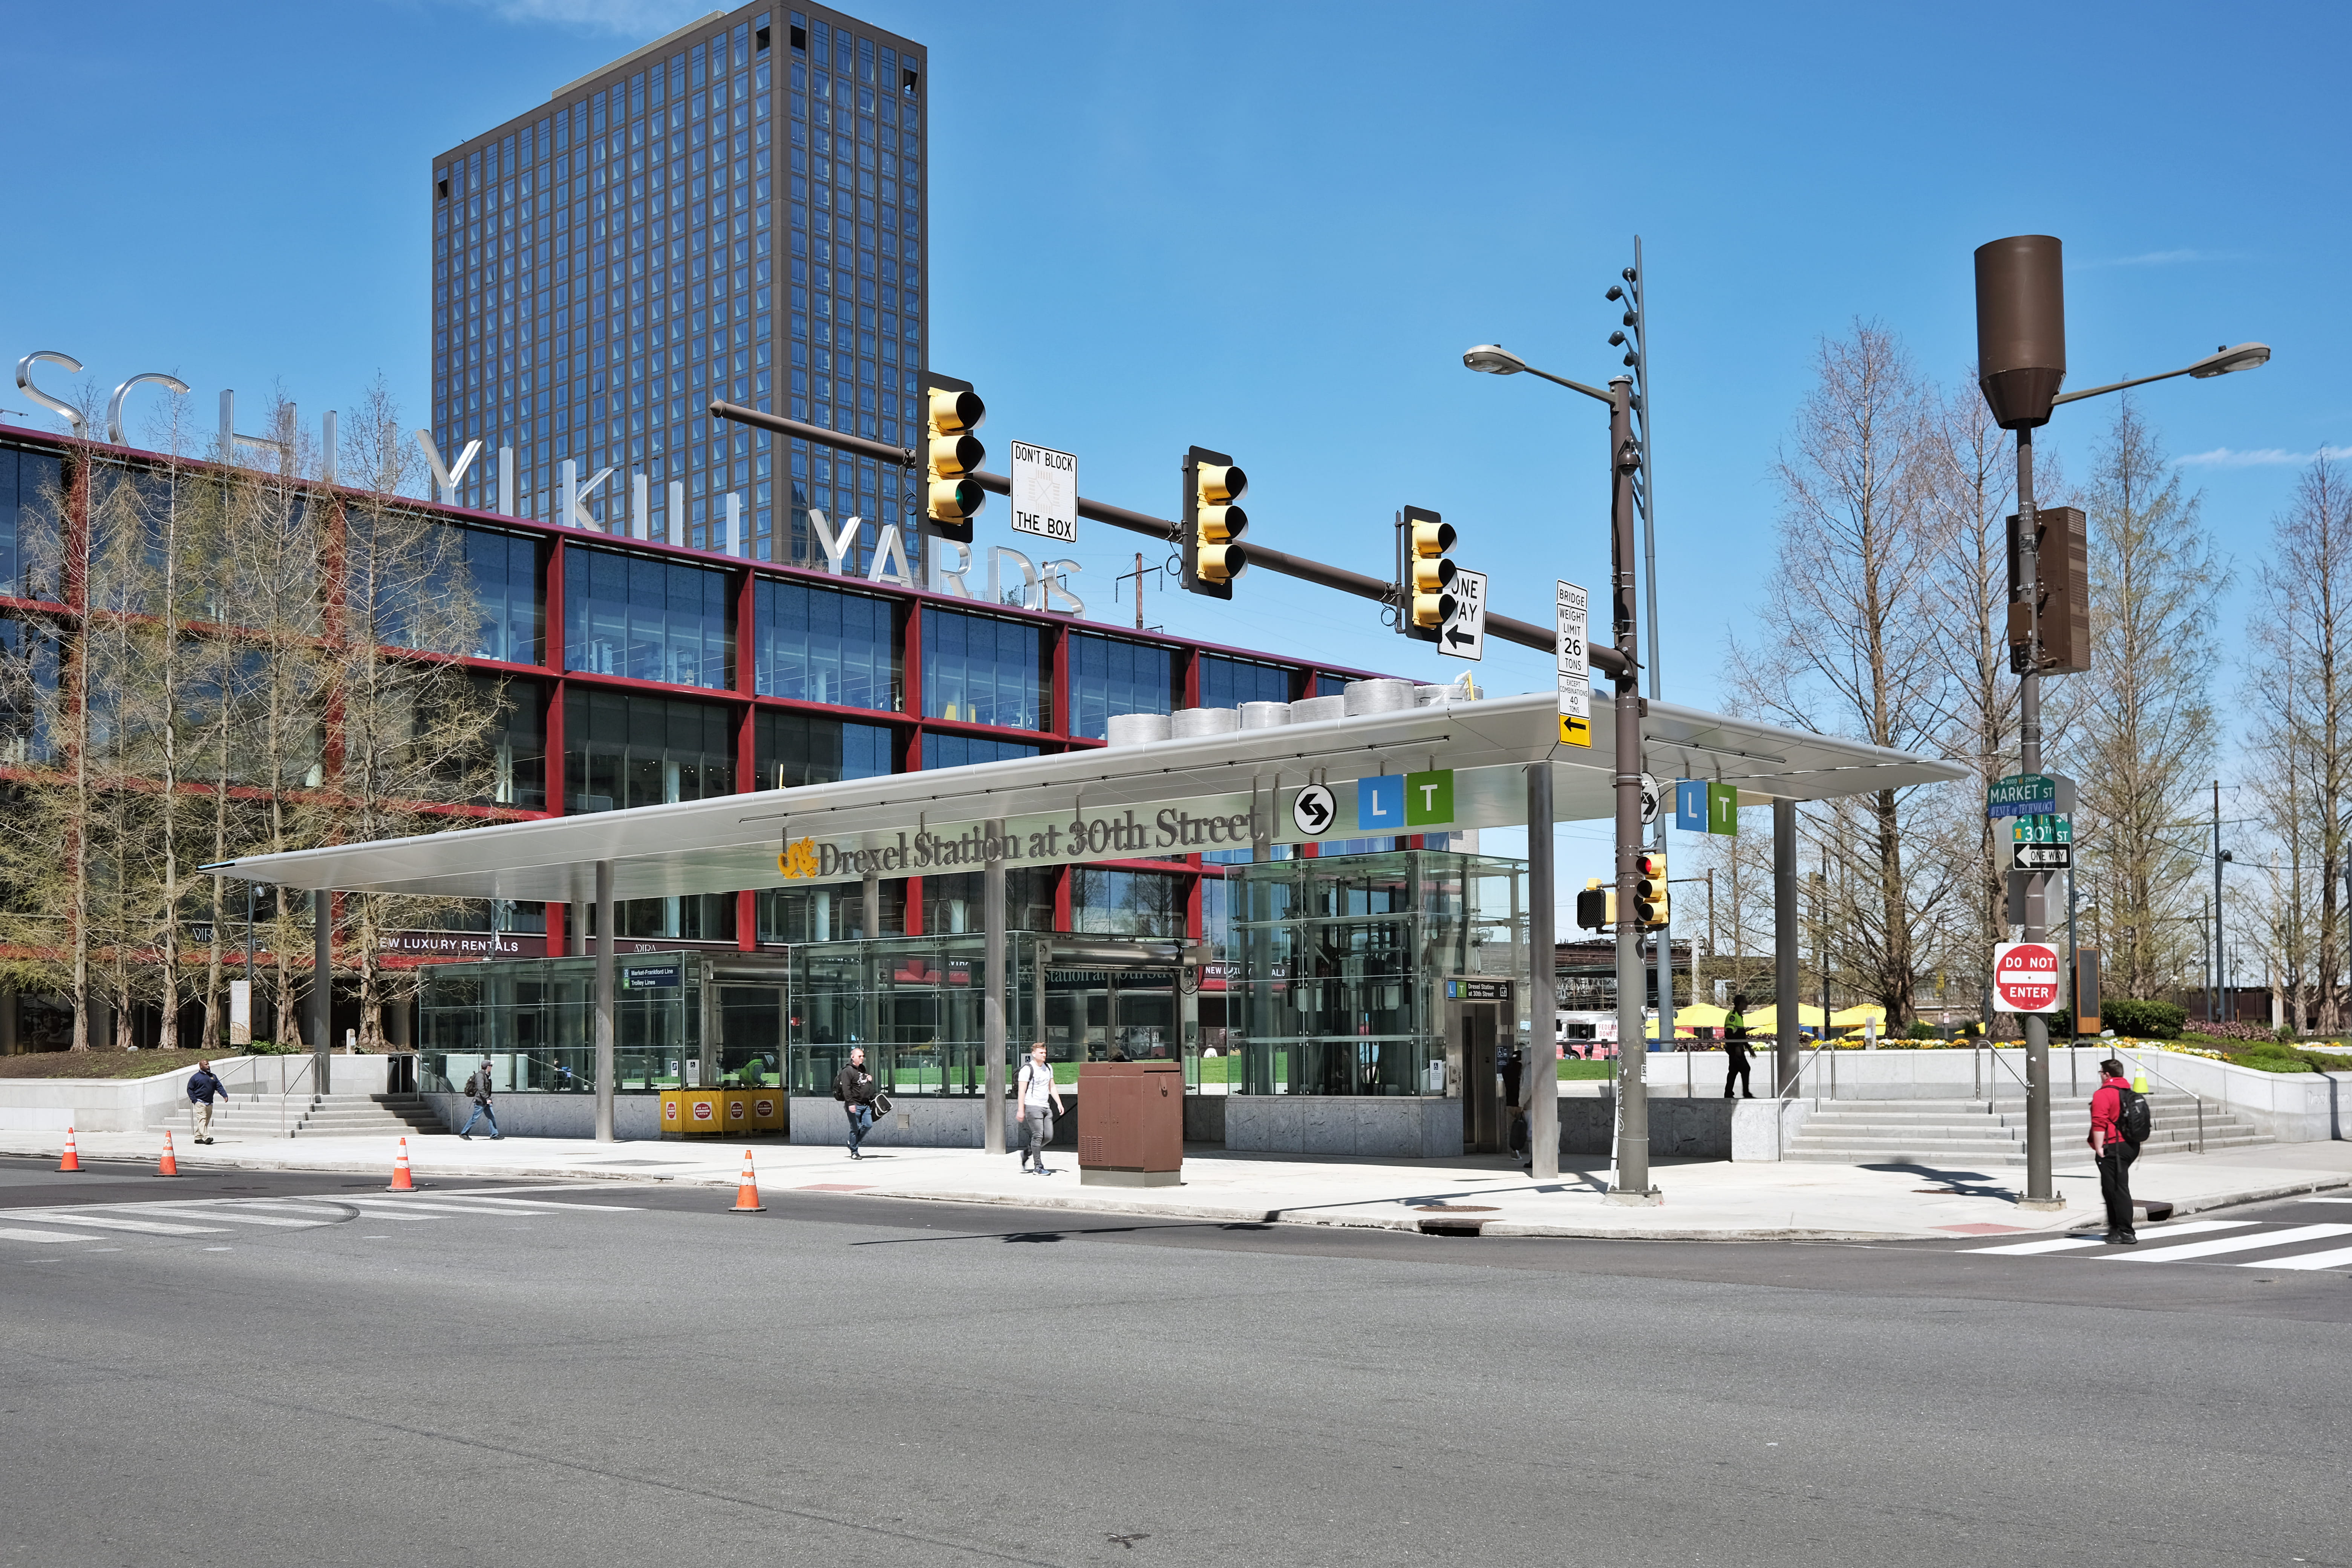 The Drexel Station at 30th Street. Photo courtesy Intersection.